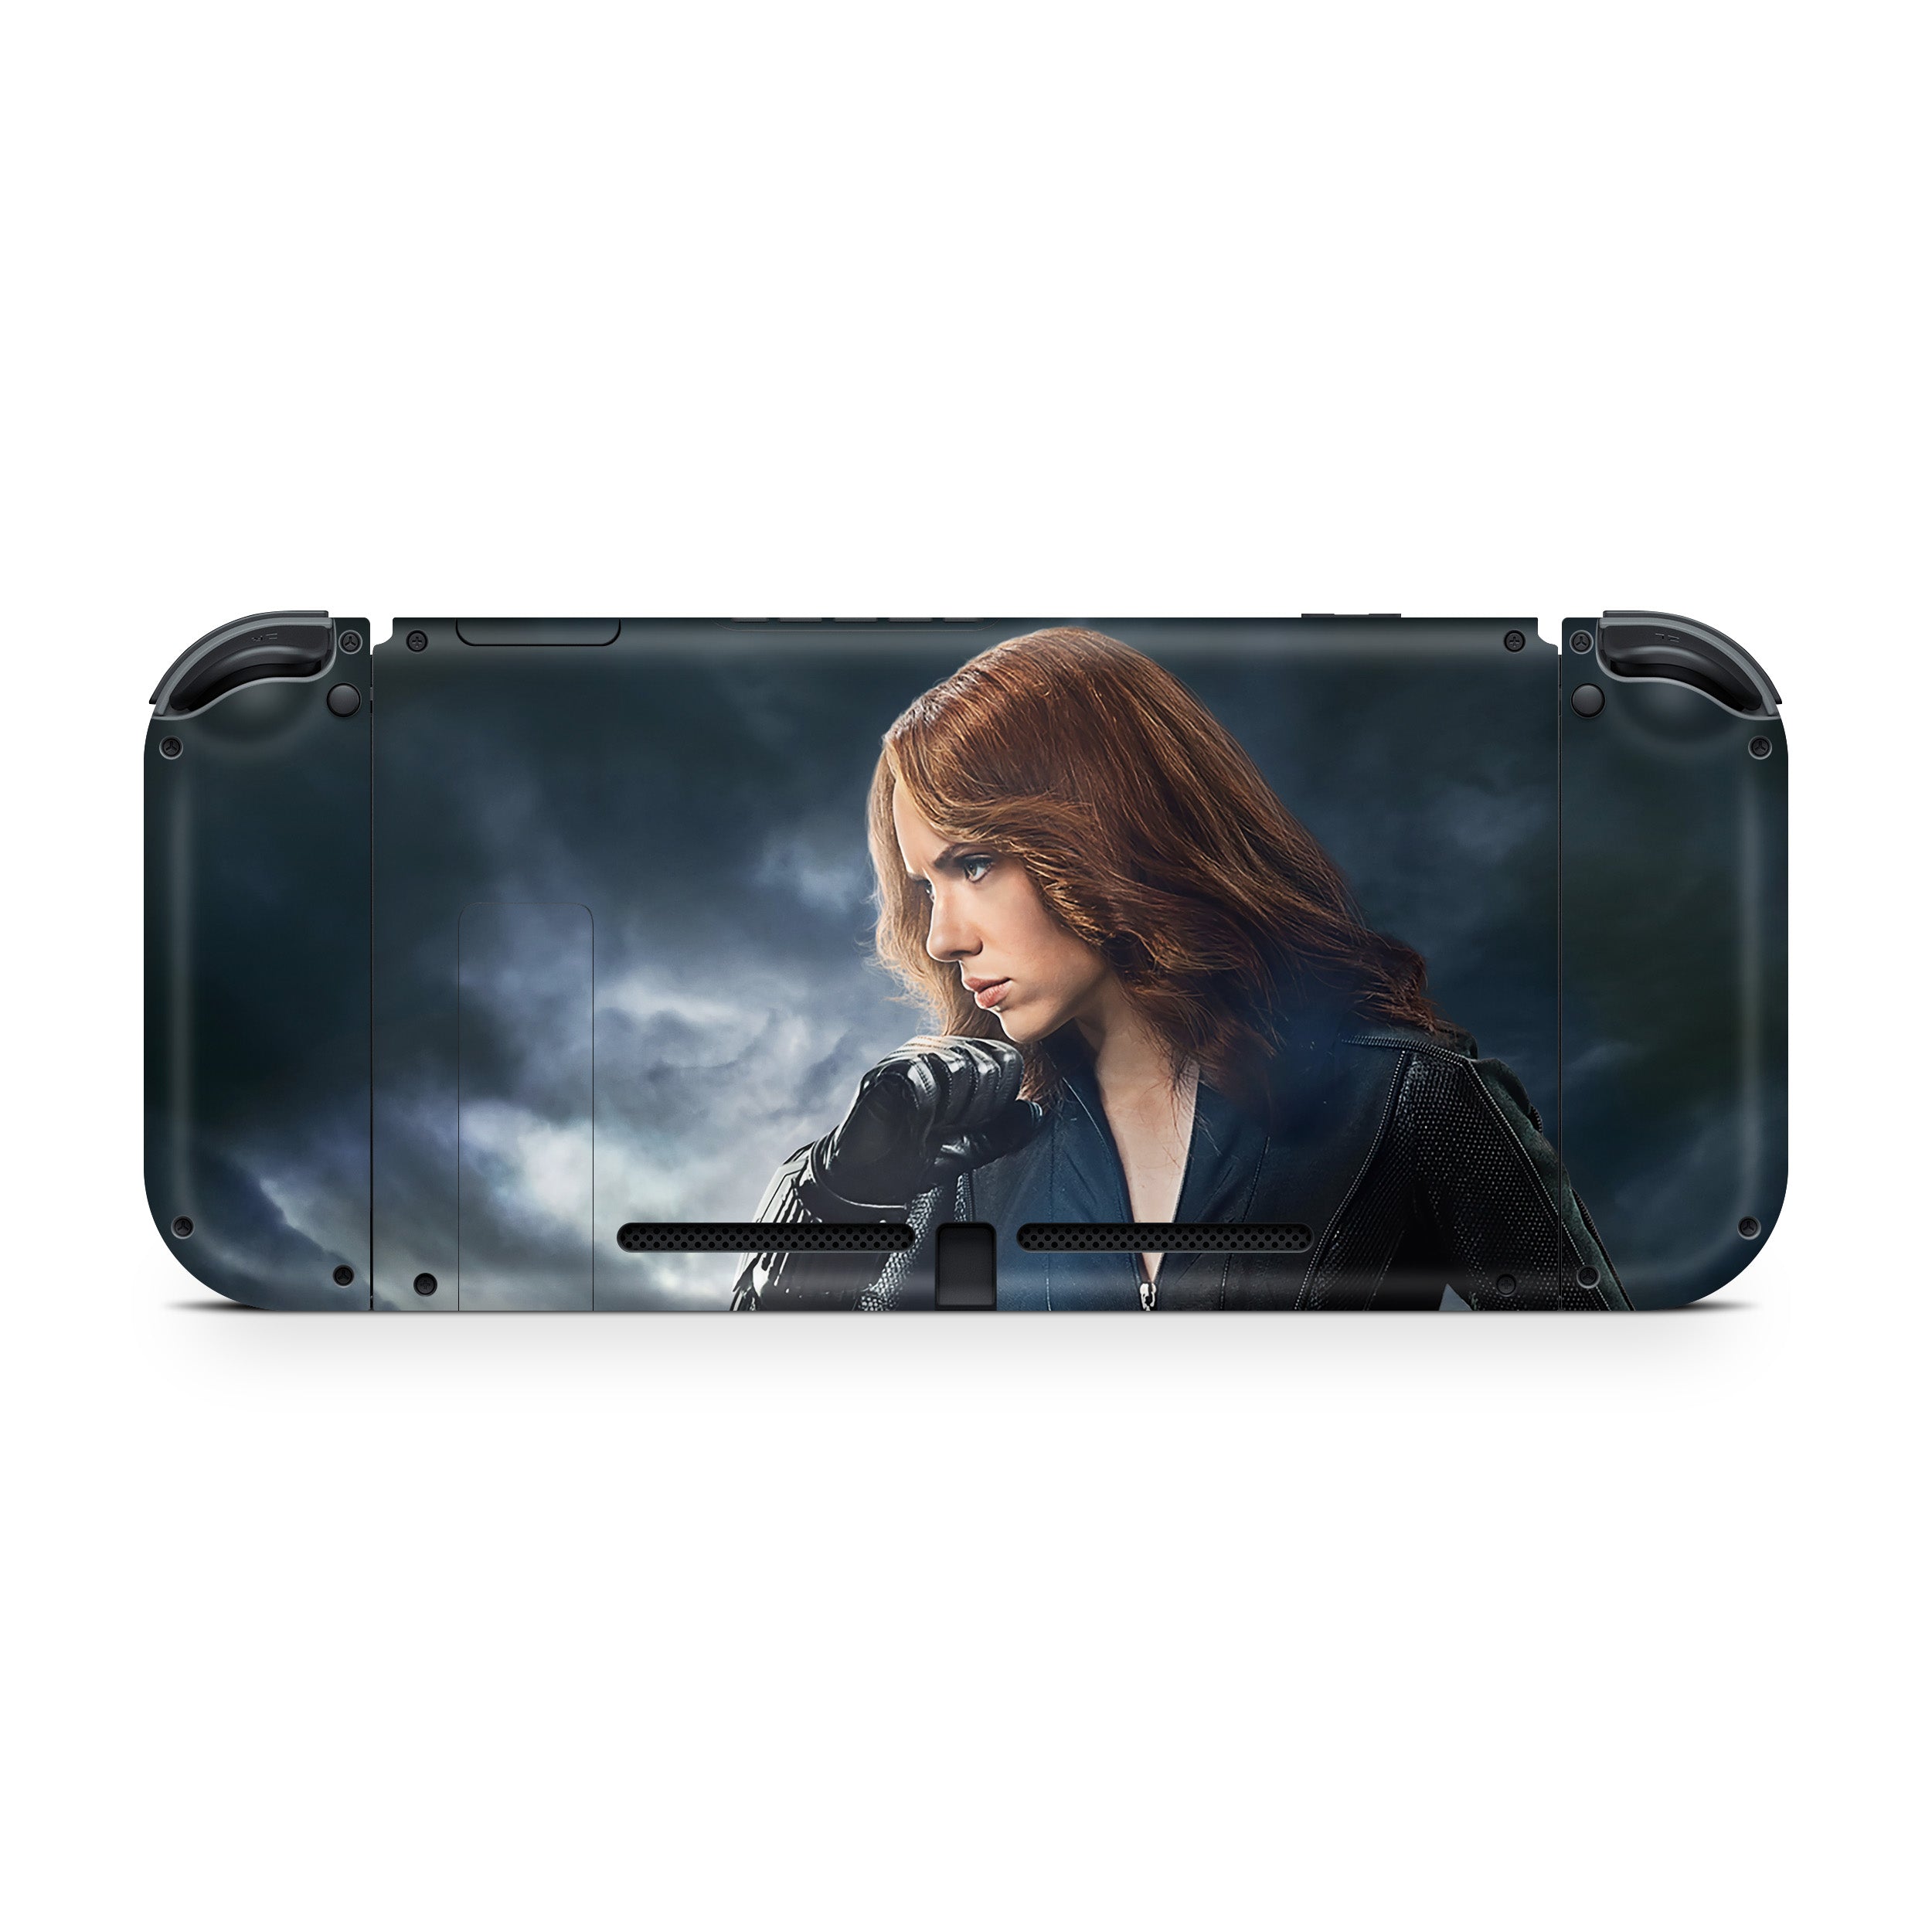 A video game skin featuring a Marvel Black Widow design for the Nintendo Switch.